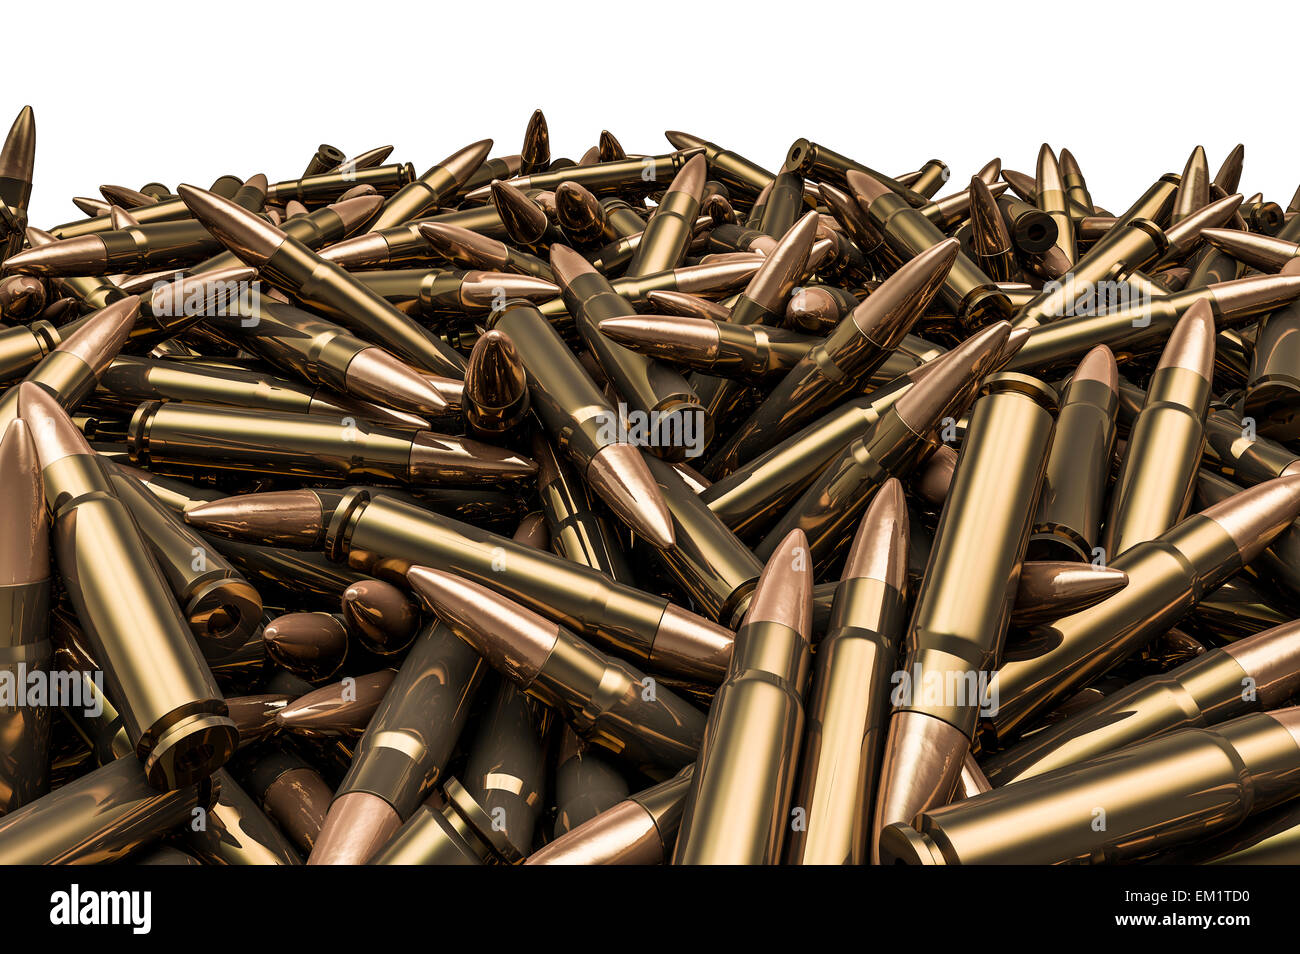 3D render of hundreds of rifle bullets Stock Photo